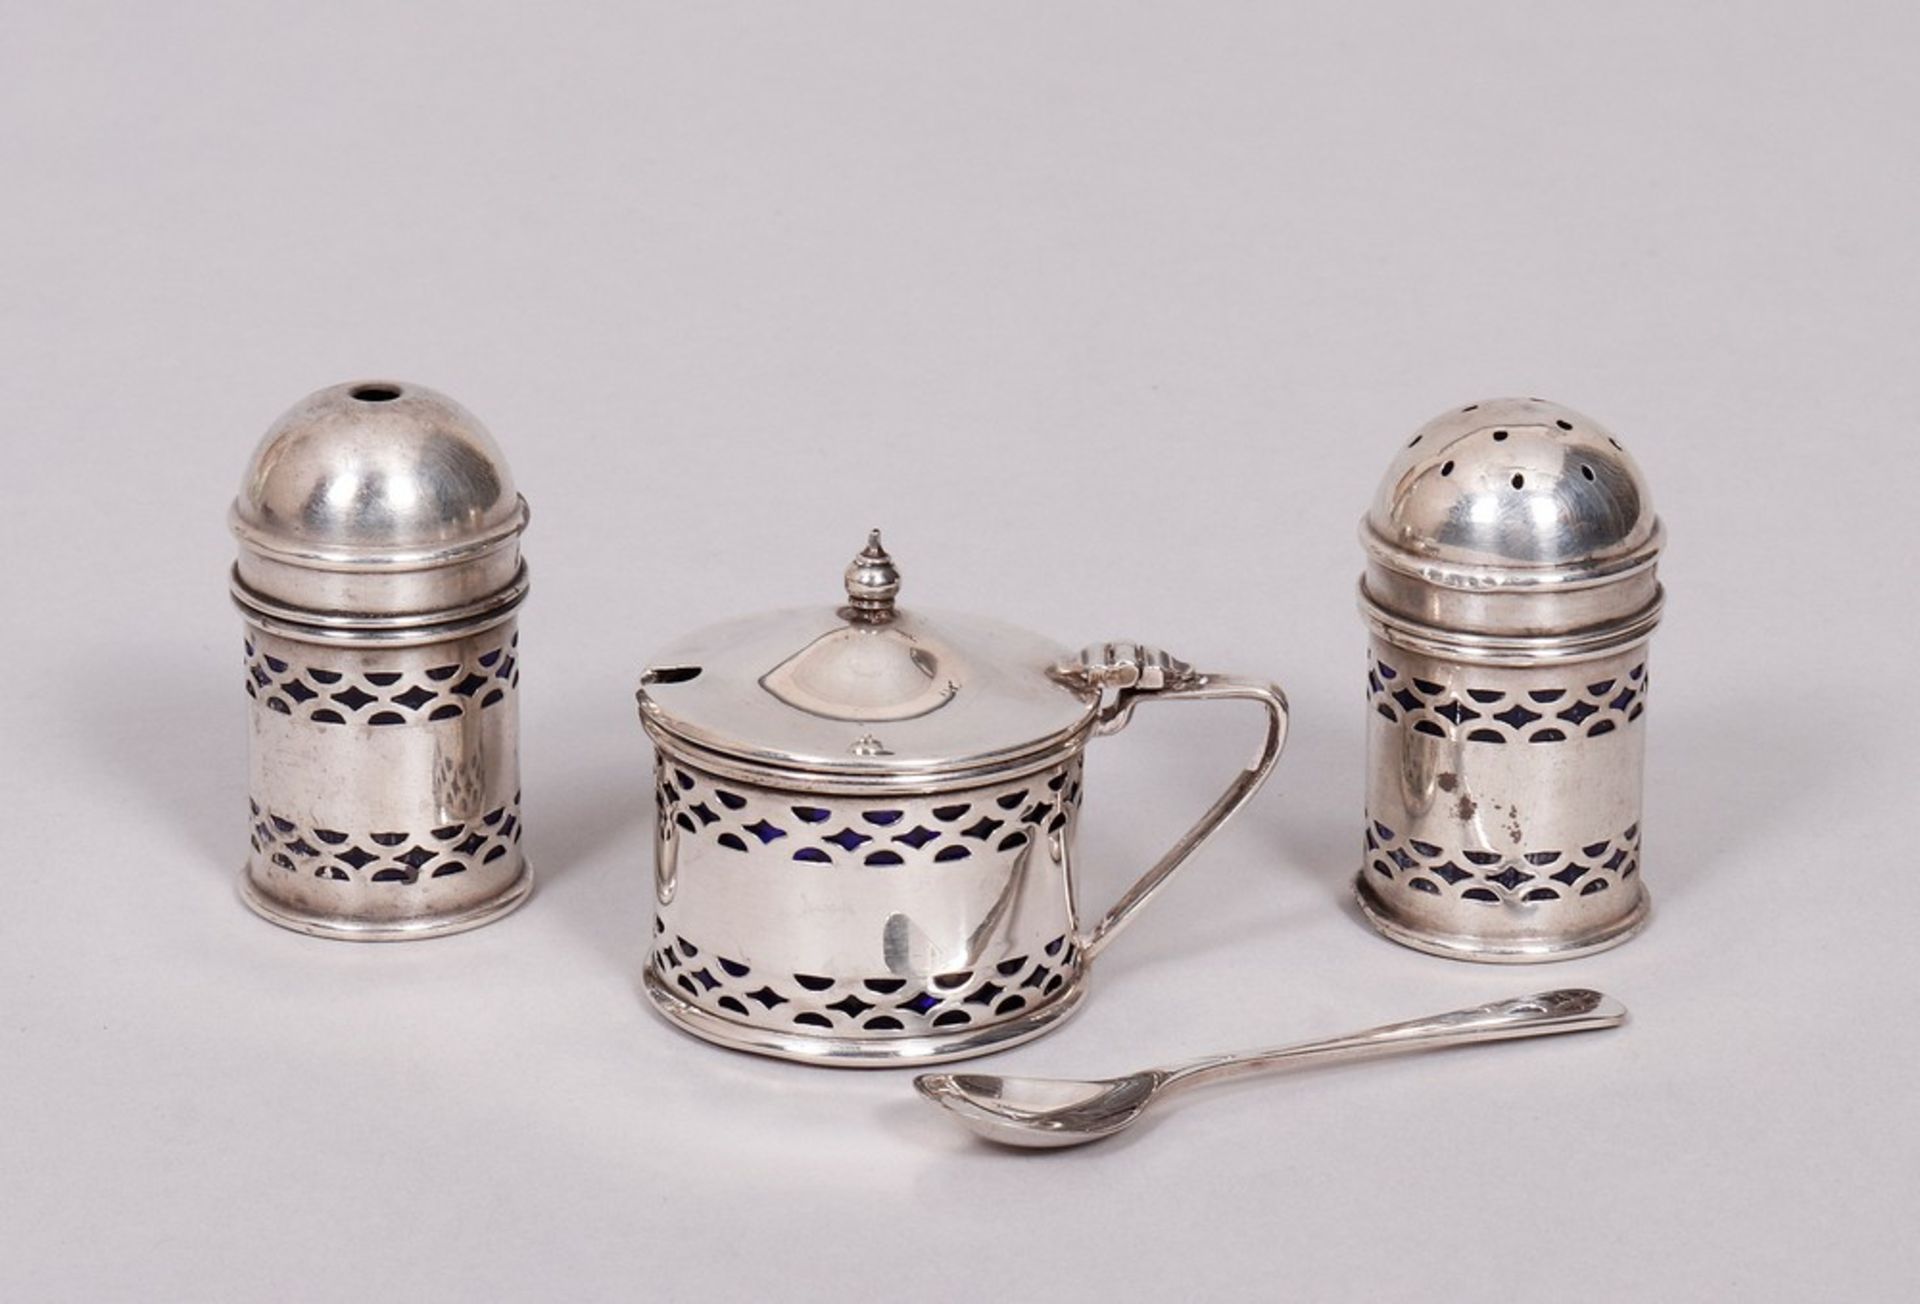 Condiment set in box, 925 silver, Charles Boyton & Sons, London, ca, 1926 - Image 2 of 4